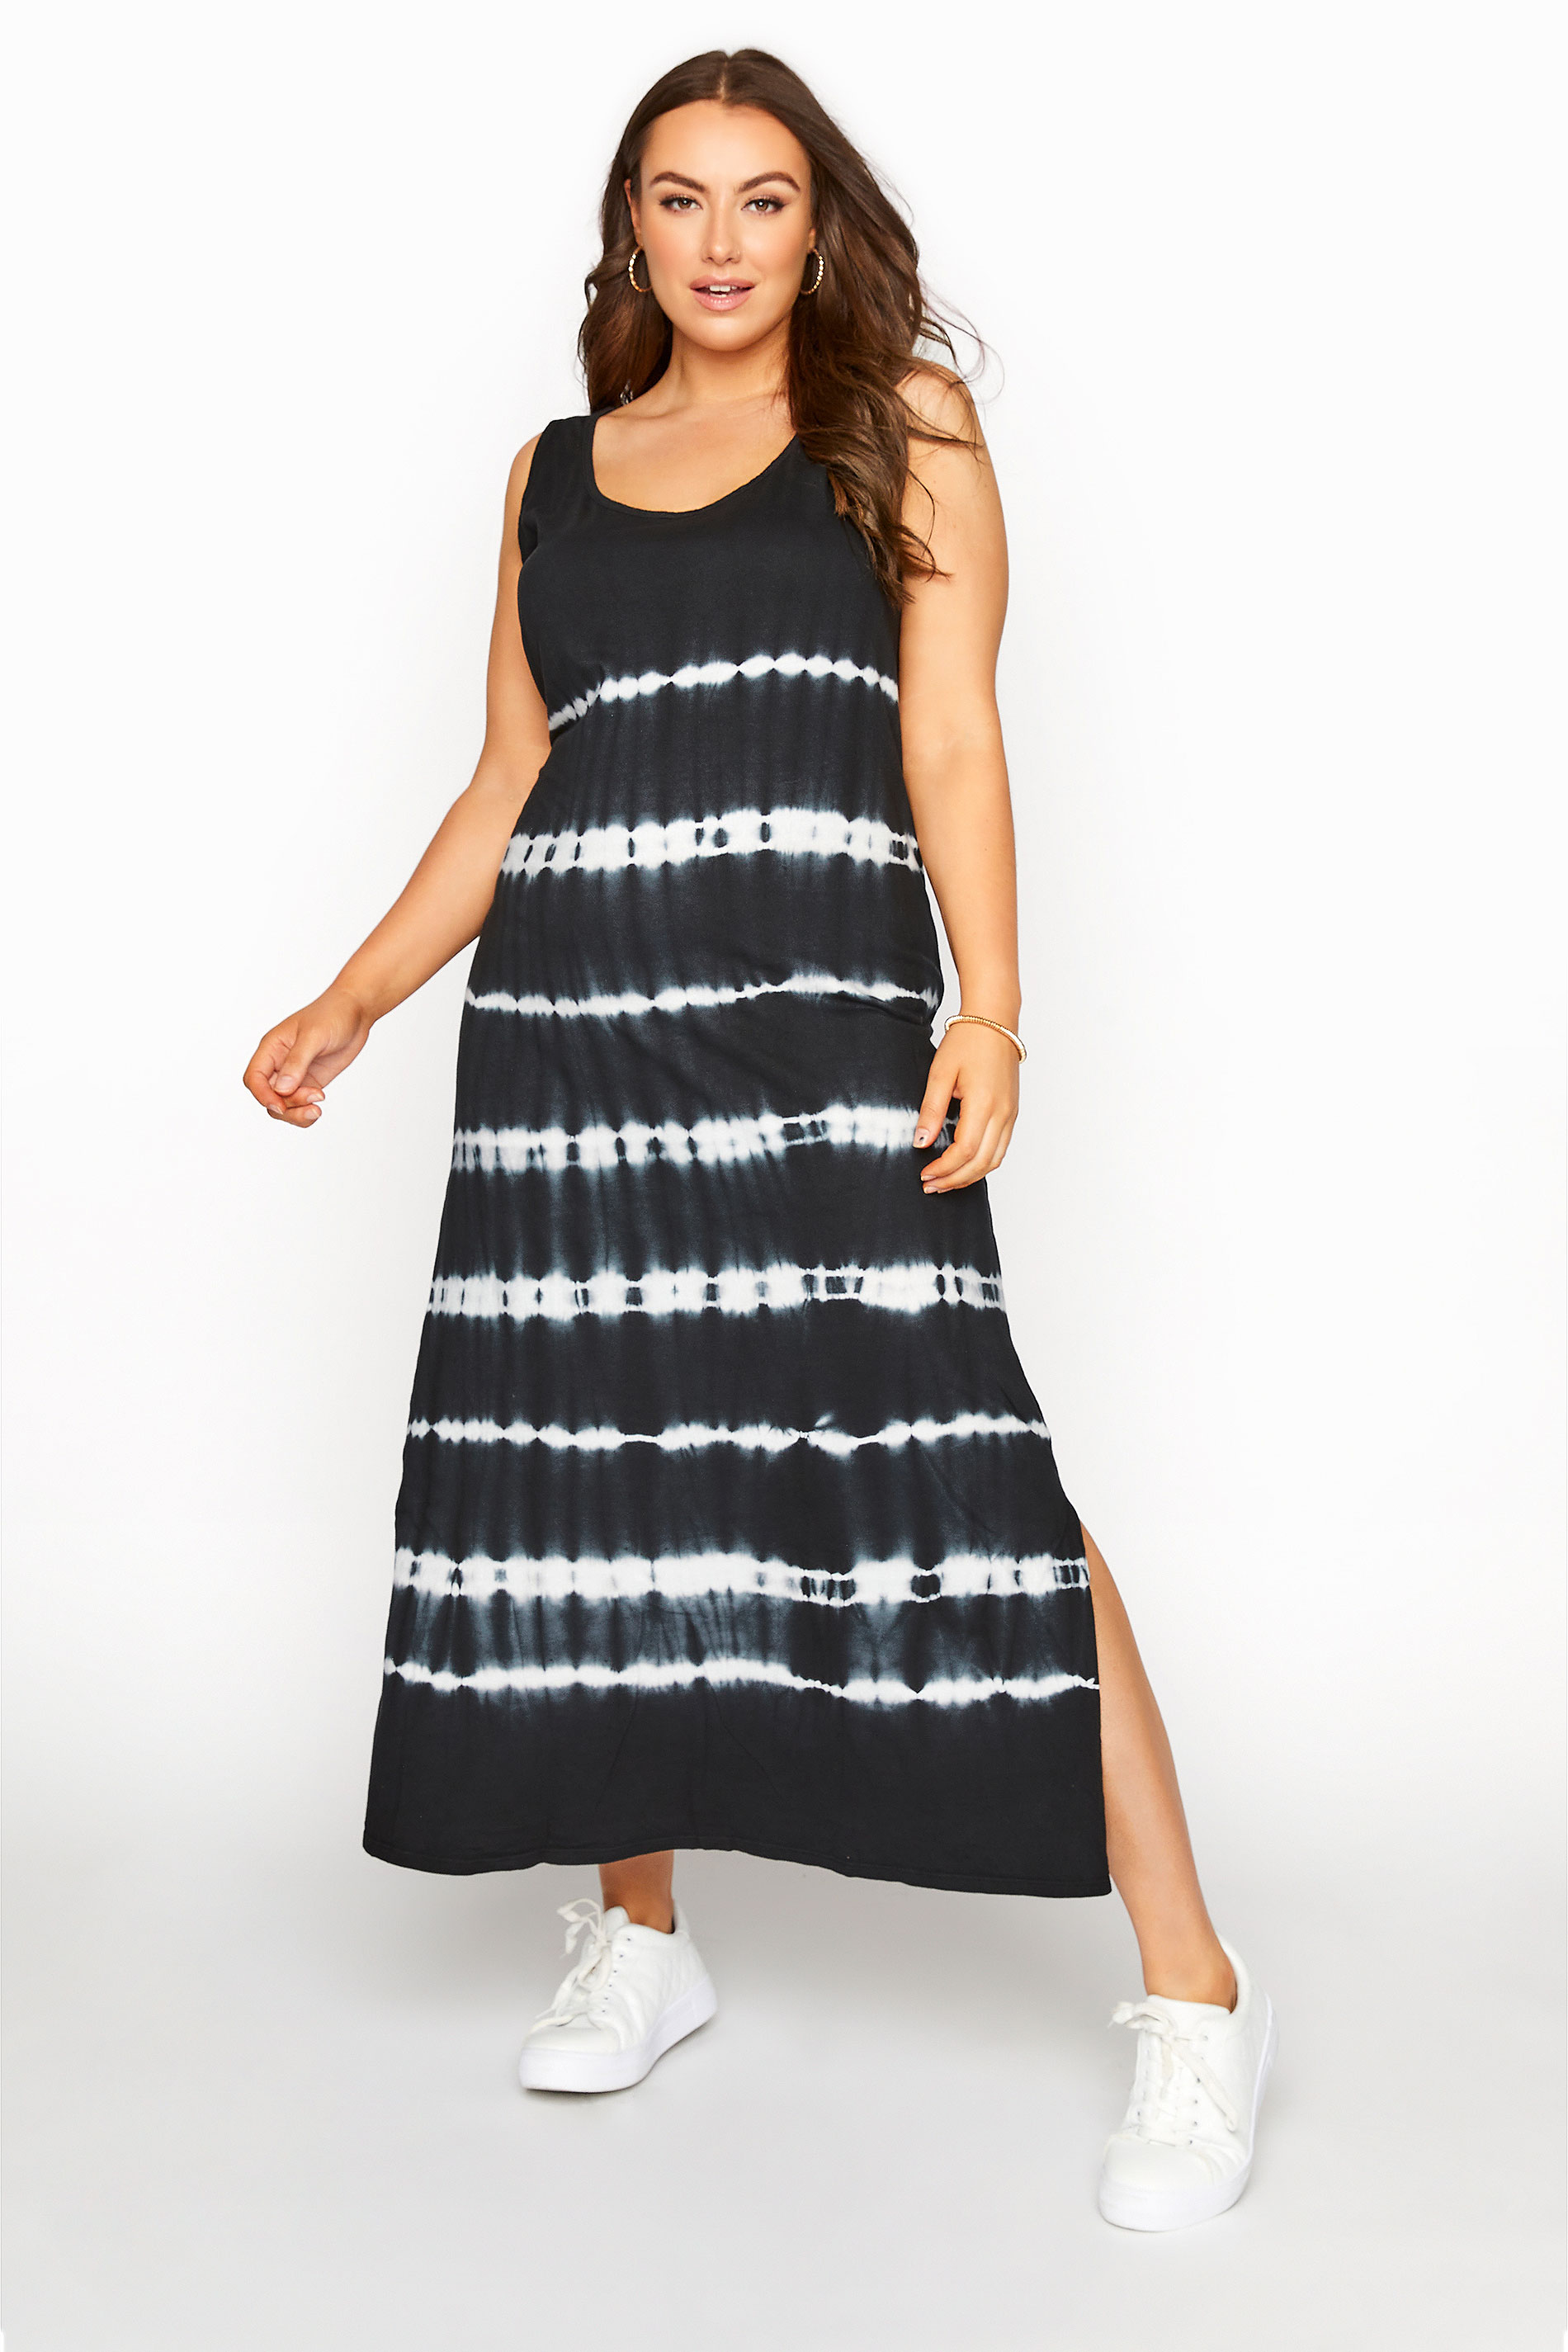 Robes Grande Taille Grande taille  Robes Longues | Robe Noire Maxi Style Tie & Dye - EI43546